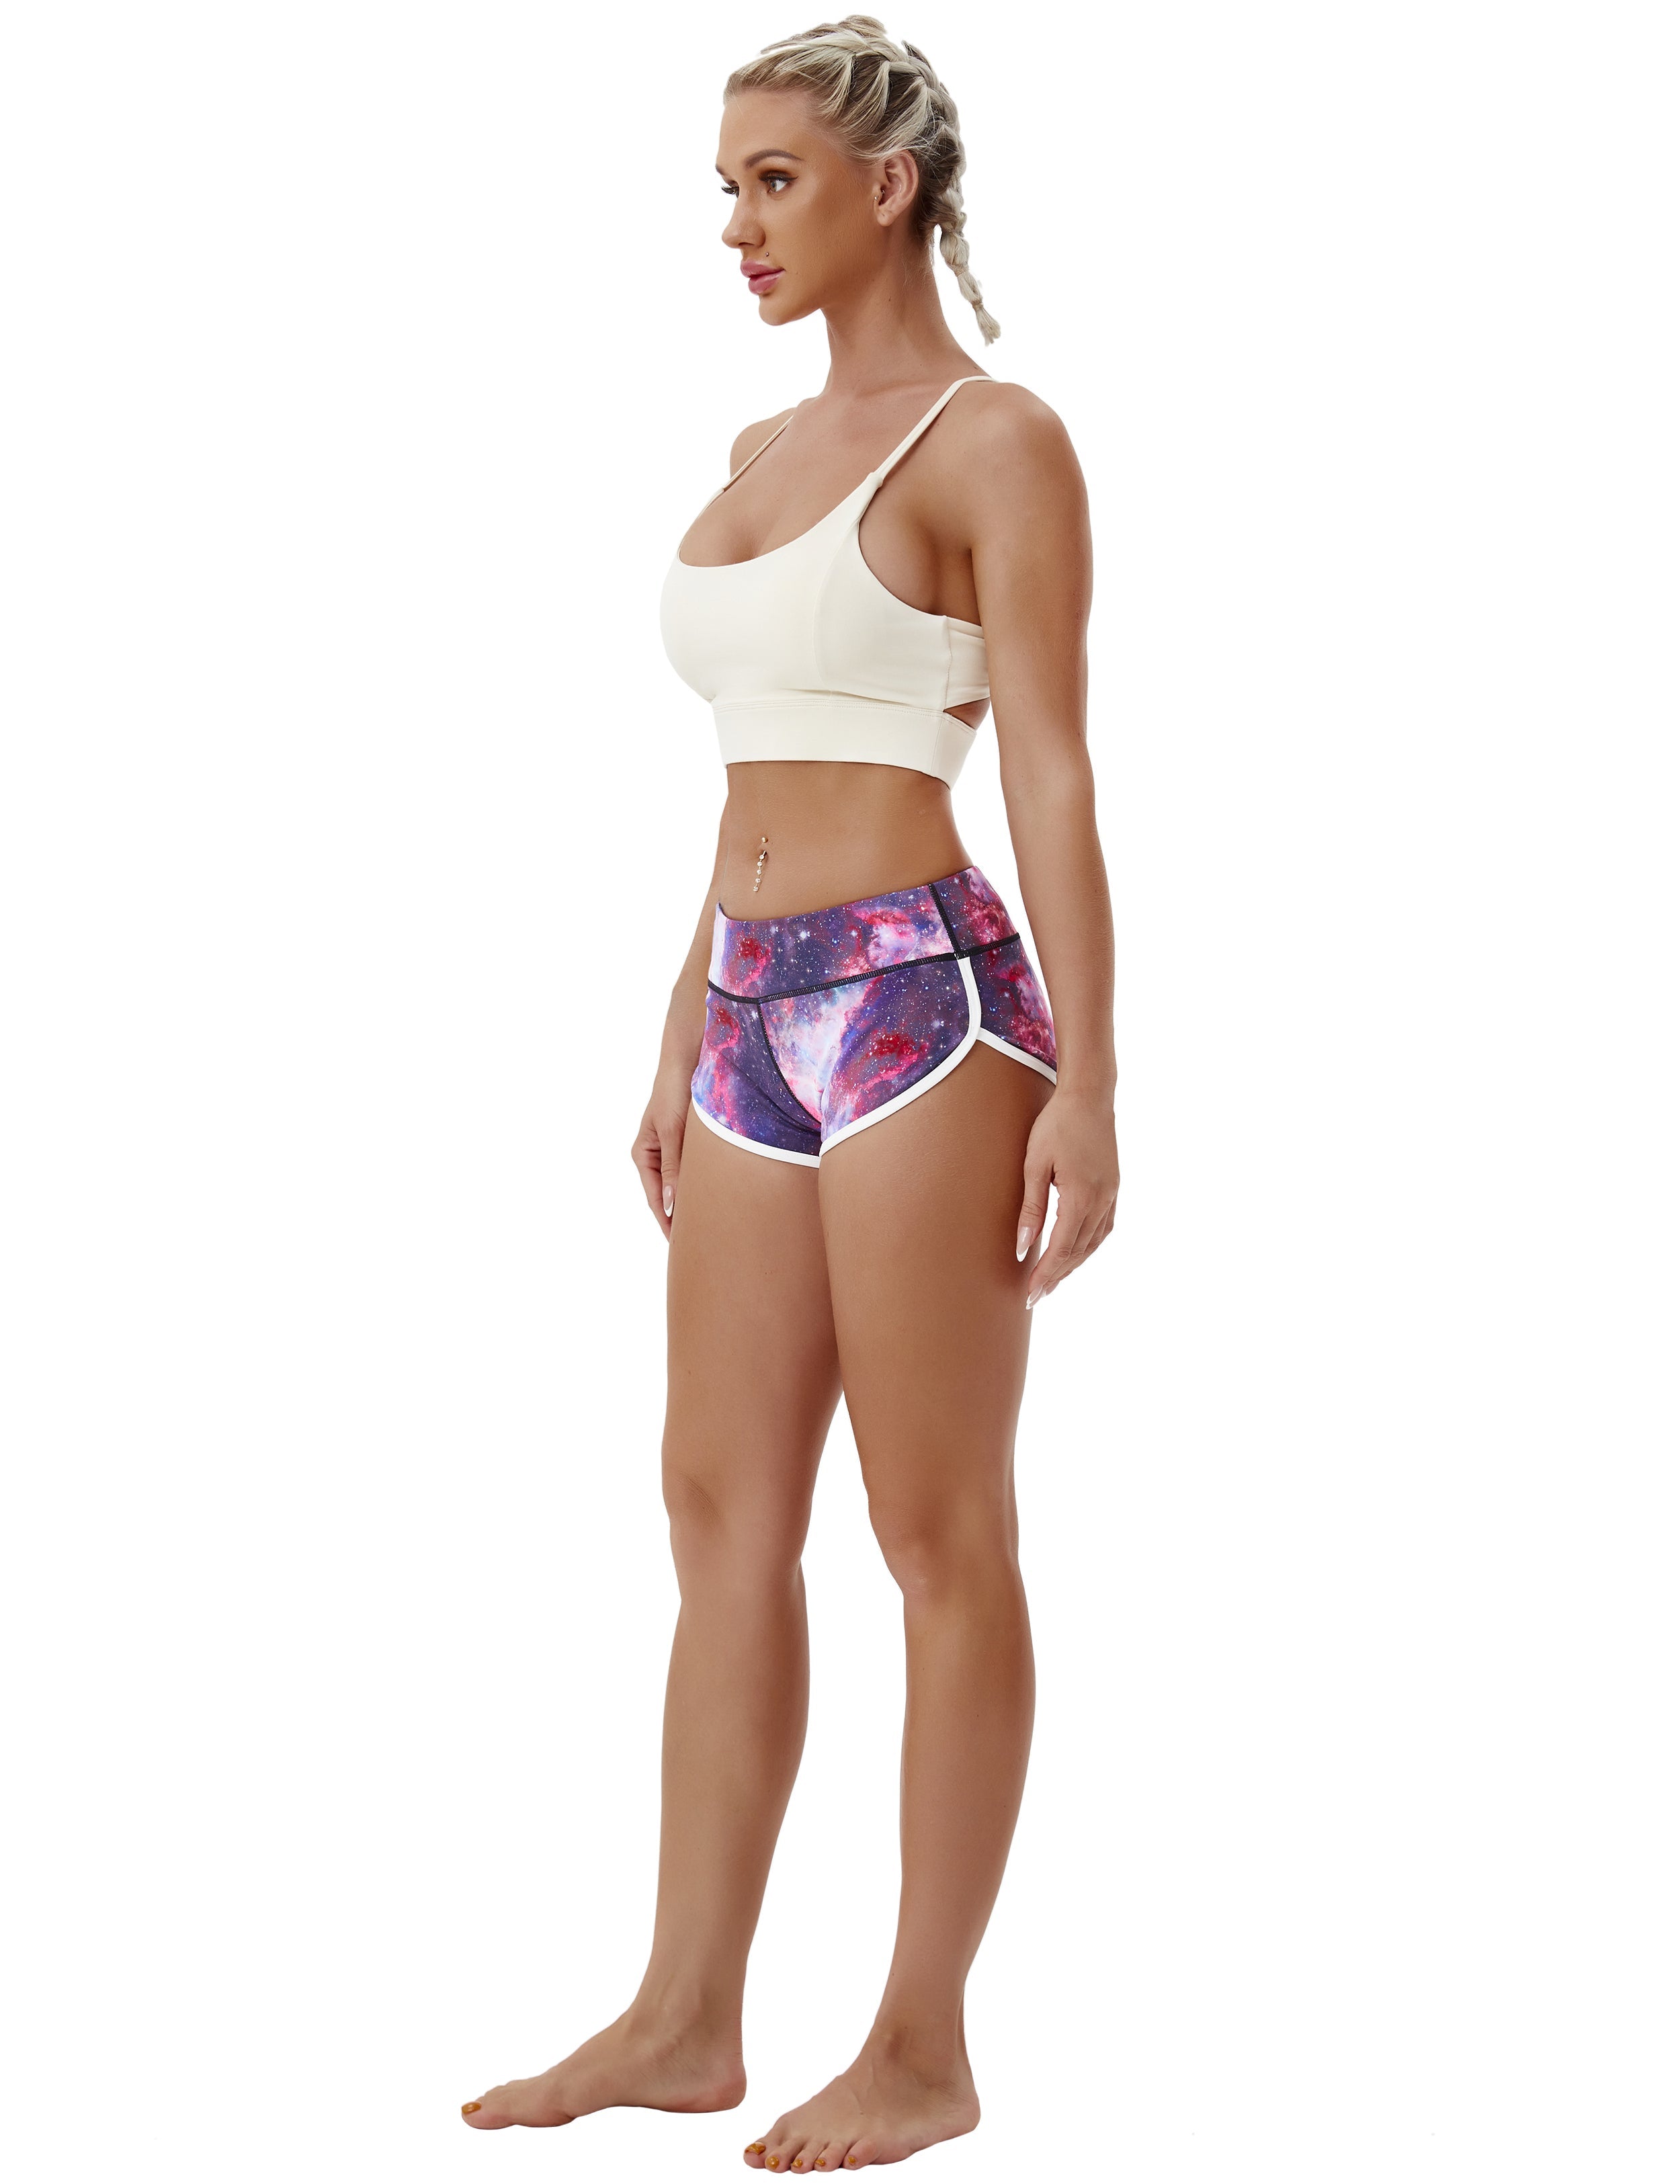 Printed Booty Yoga Shorts galaxy Sleek, soft, smooth and totally comfortable: our newest sexy style is here. Softest-ever fabric High elasticity High density 4-way stretch Fabric doesn't attract lint easily No see-through Moisture-wicking Machine wash 78% Polyester, 22% Spandex